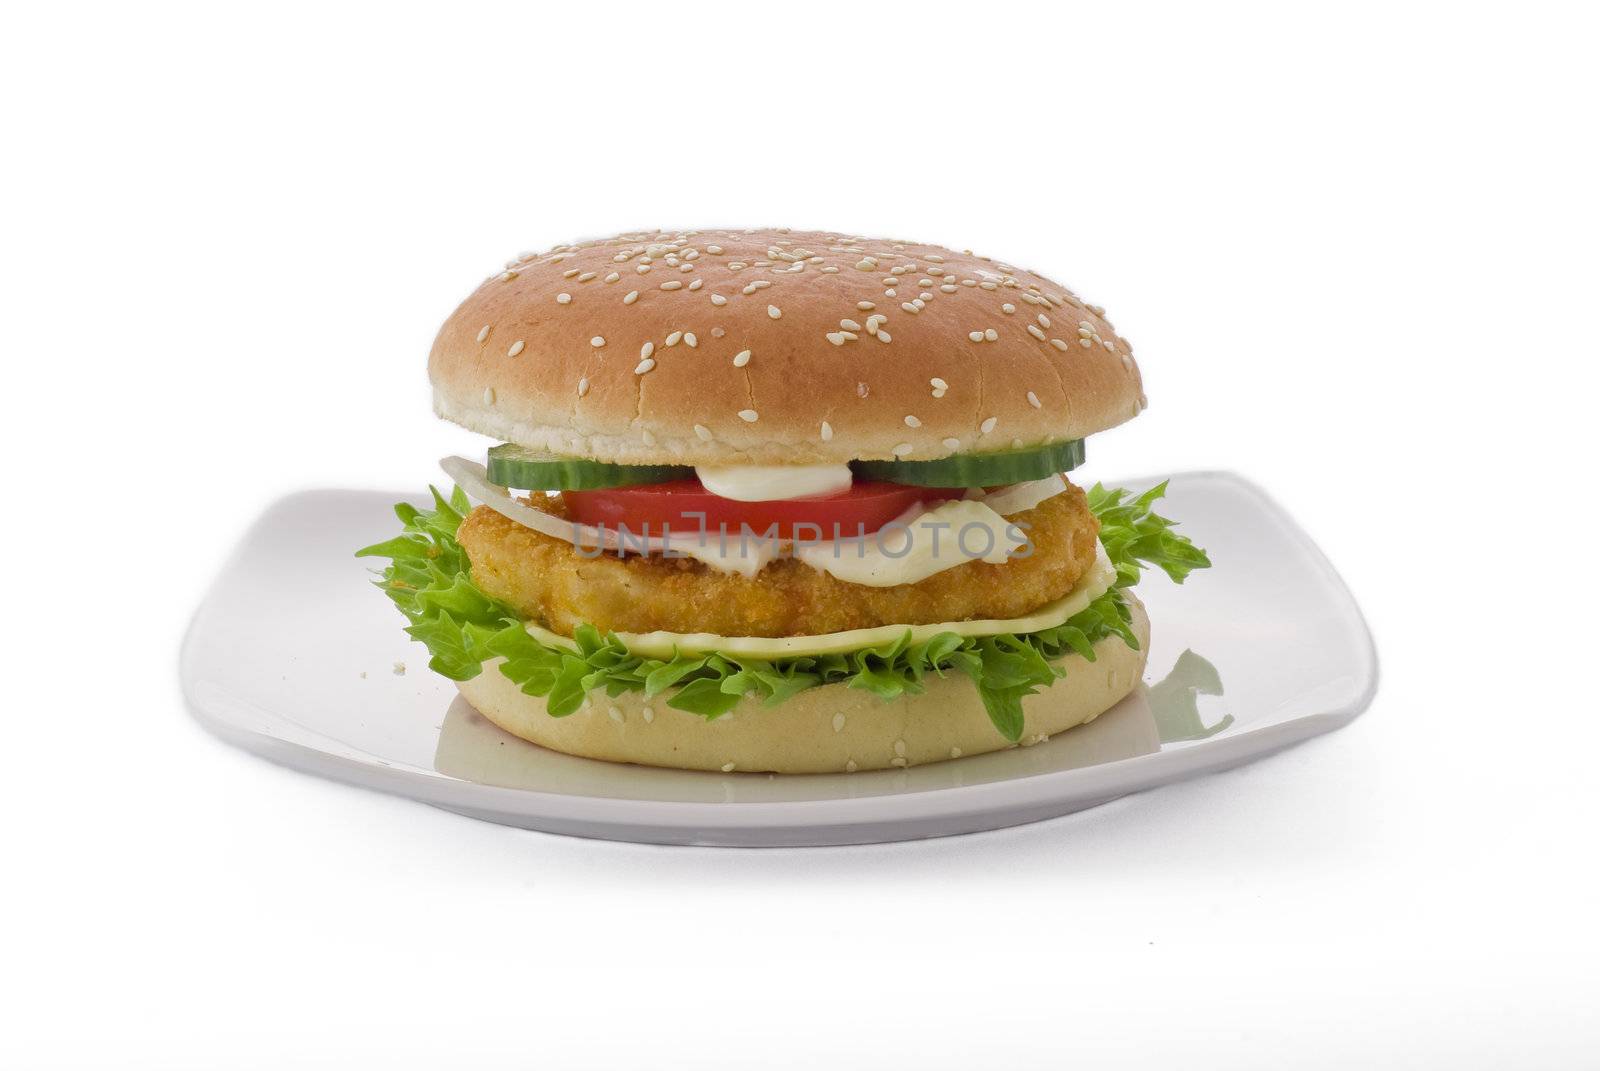 Chicken cheese burger on white background - isolated